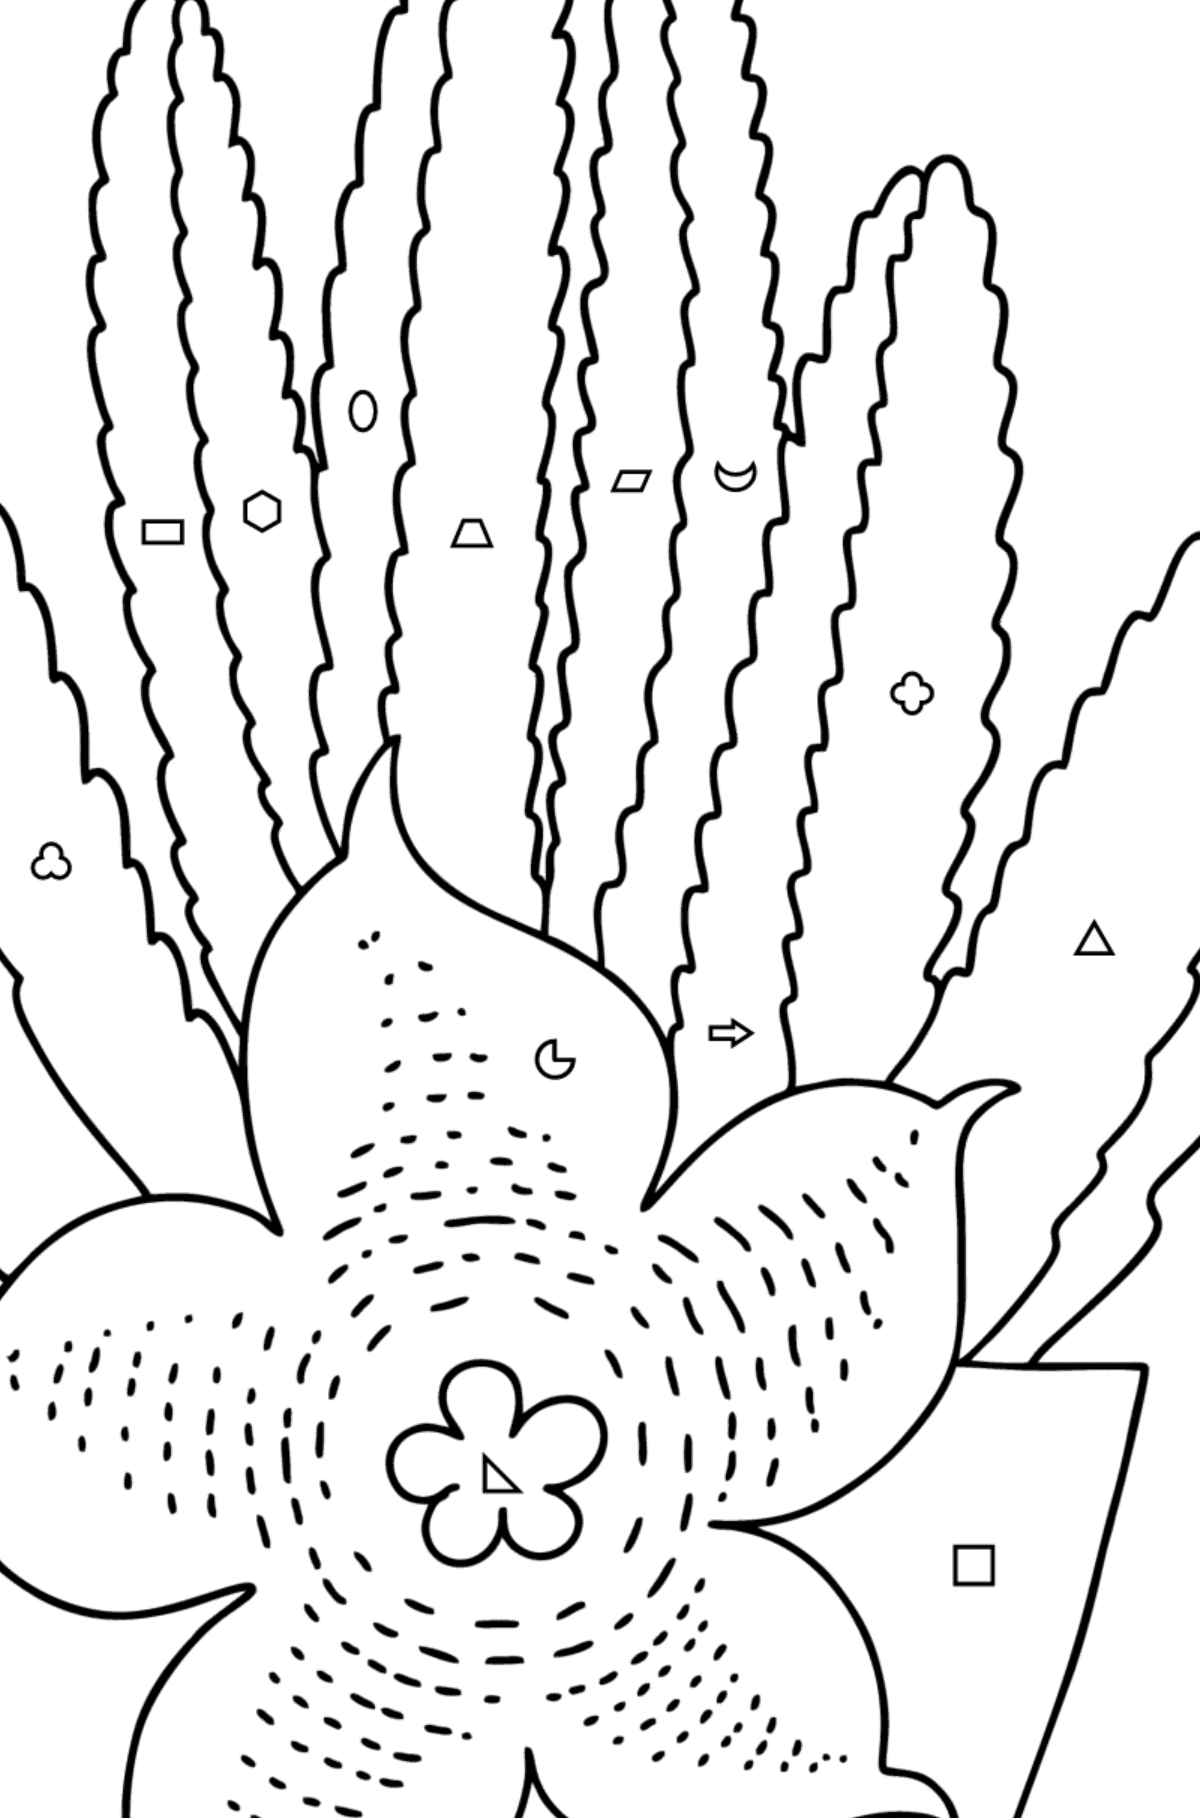 Stapelia Cactus coloring page - Coloring by Geometric Shapes for Kids